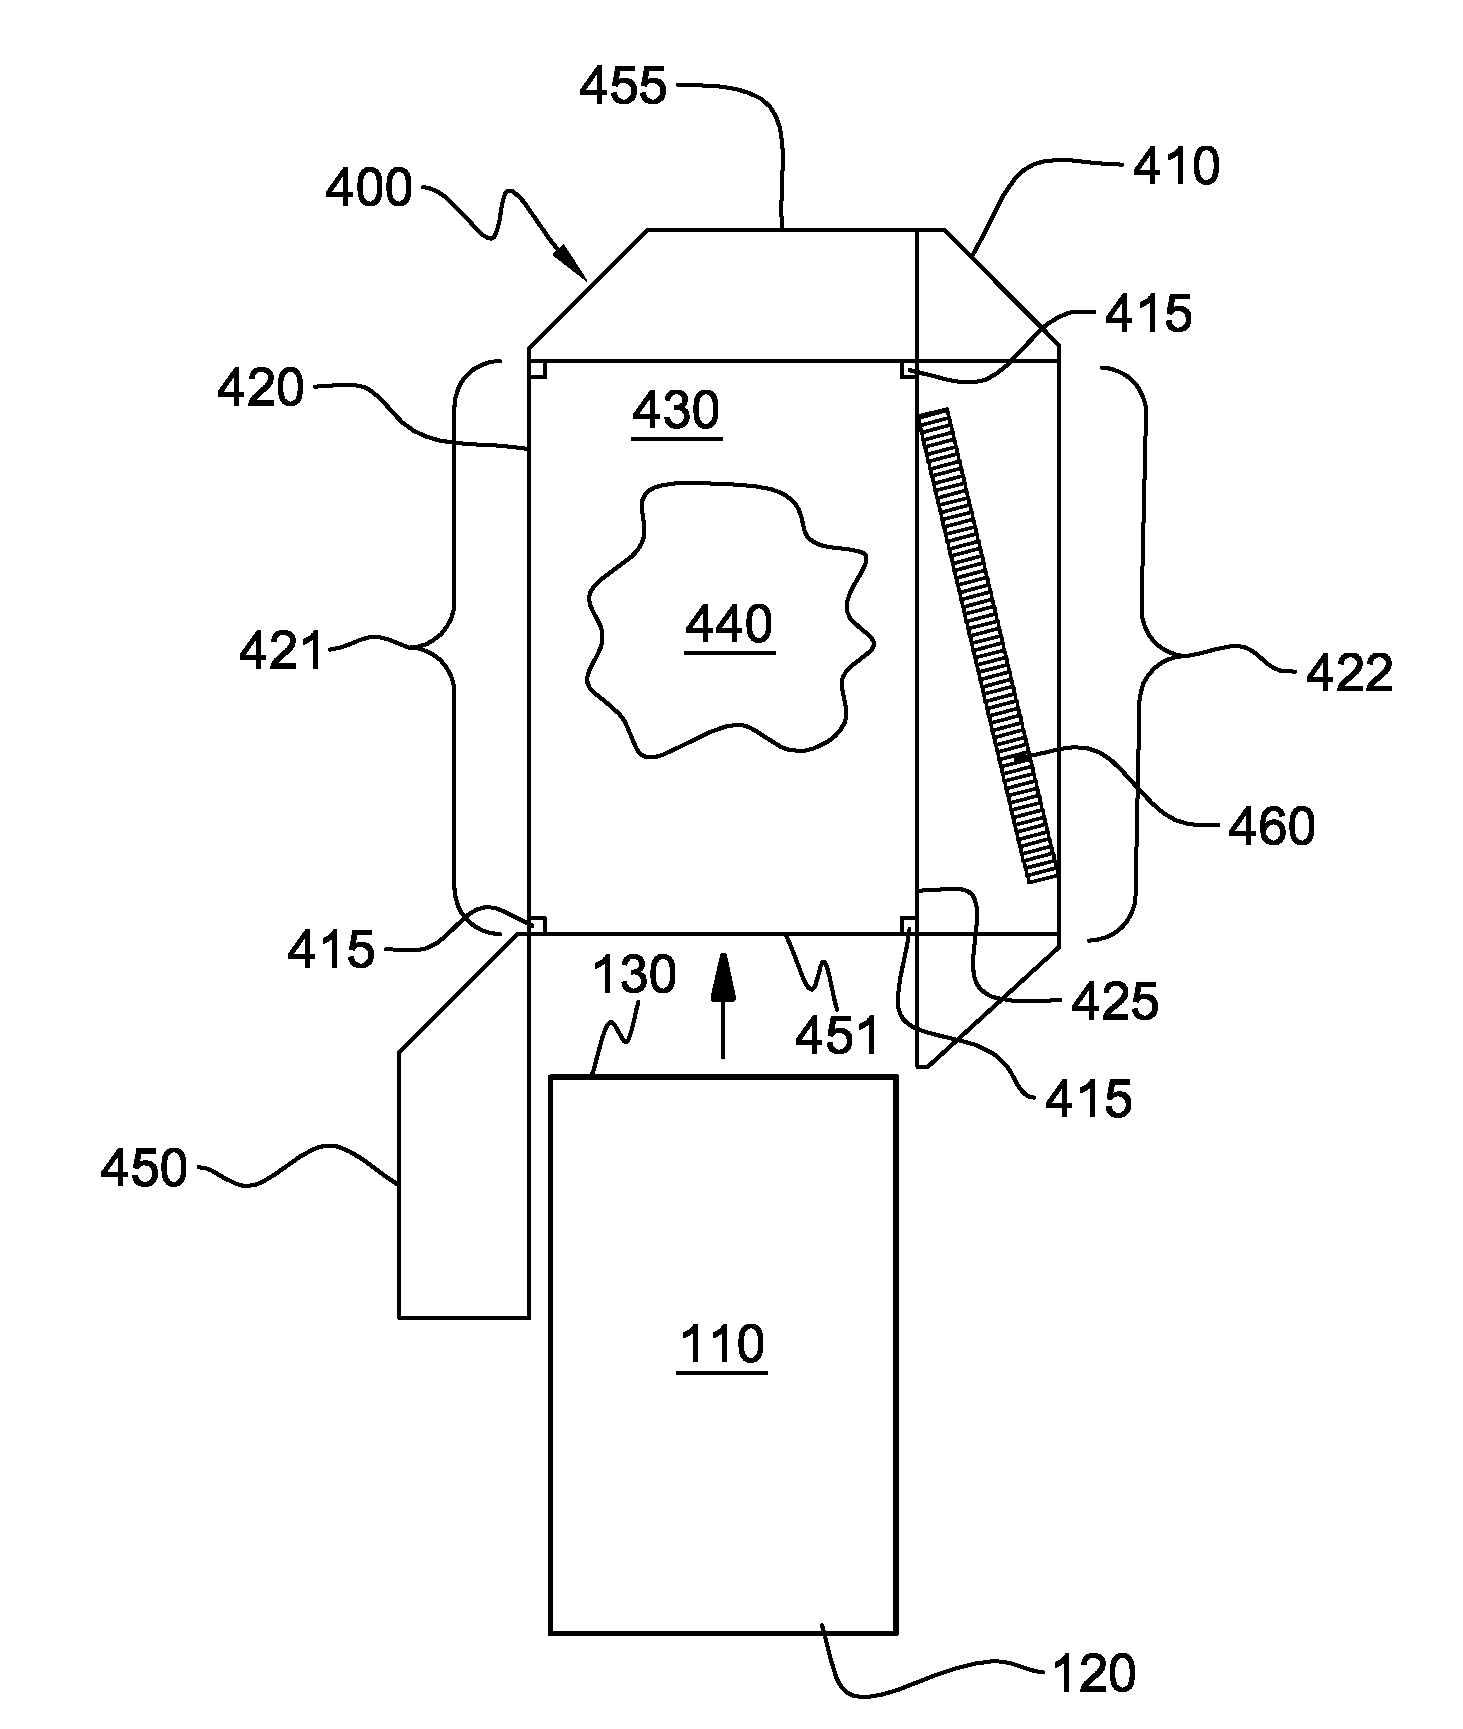 Docking station with closed loop airlfow path for facilitating cooling of an electronics rack